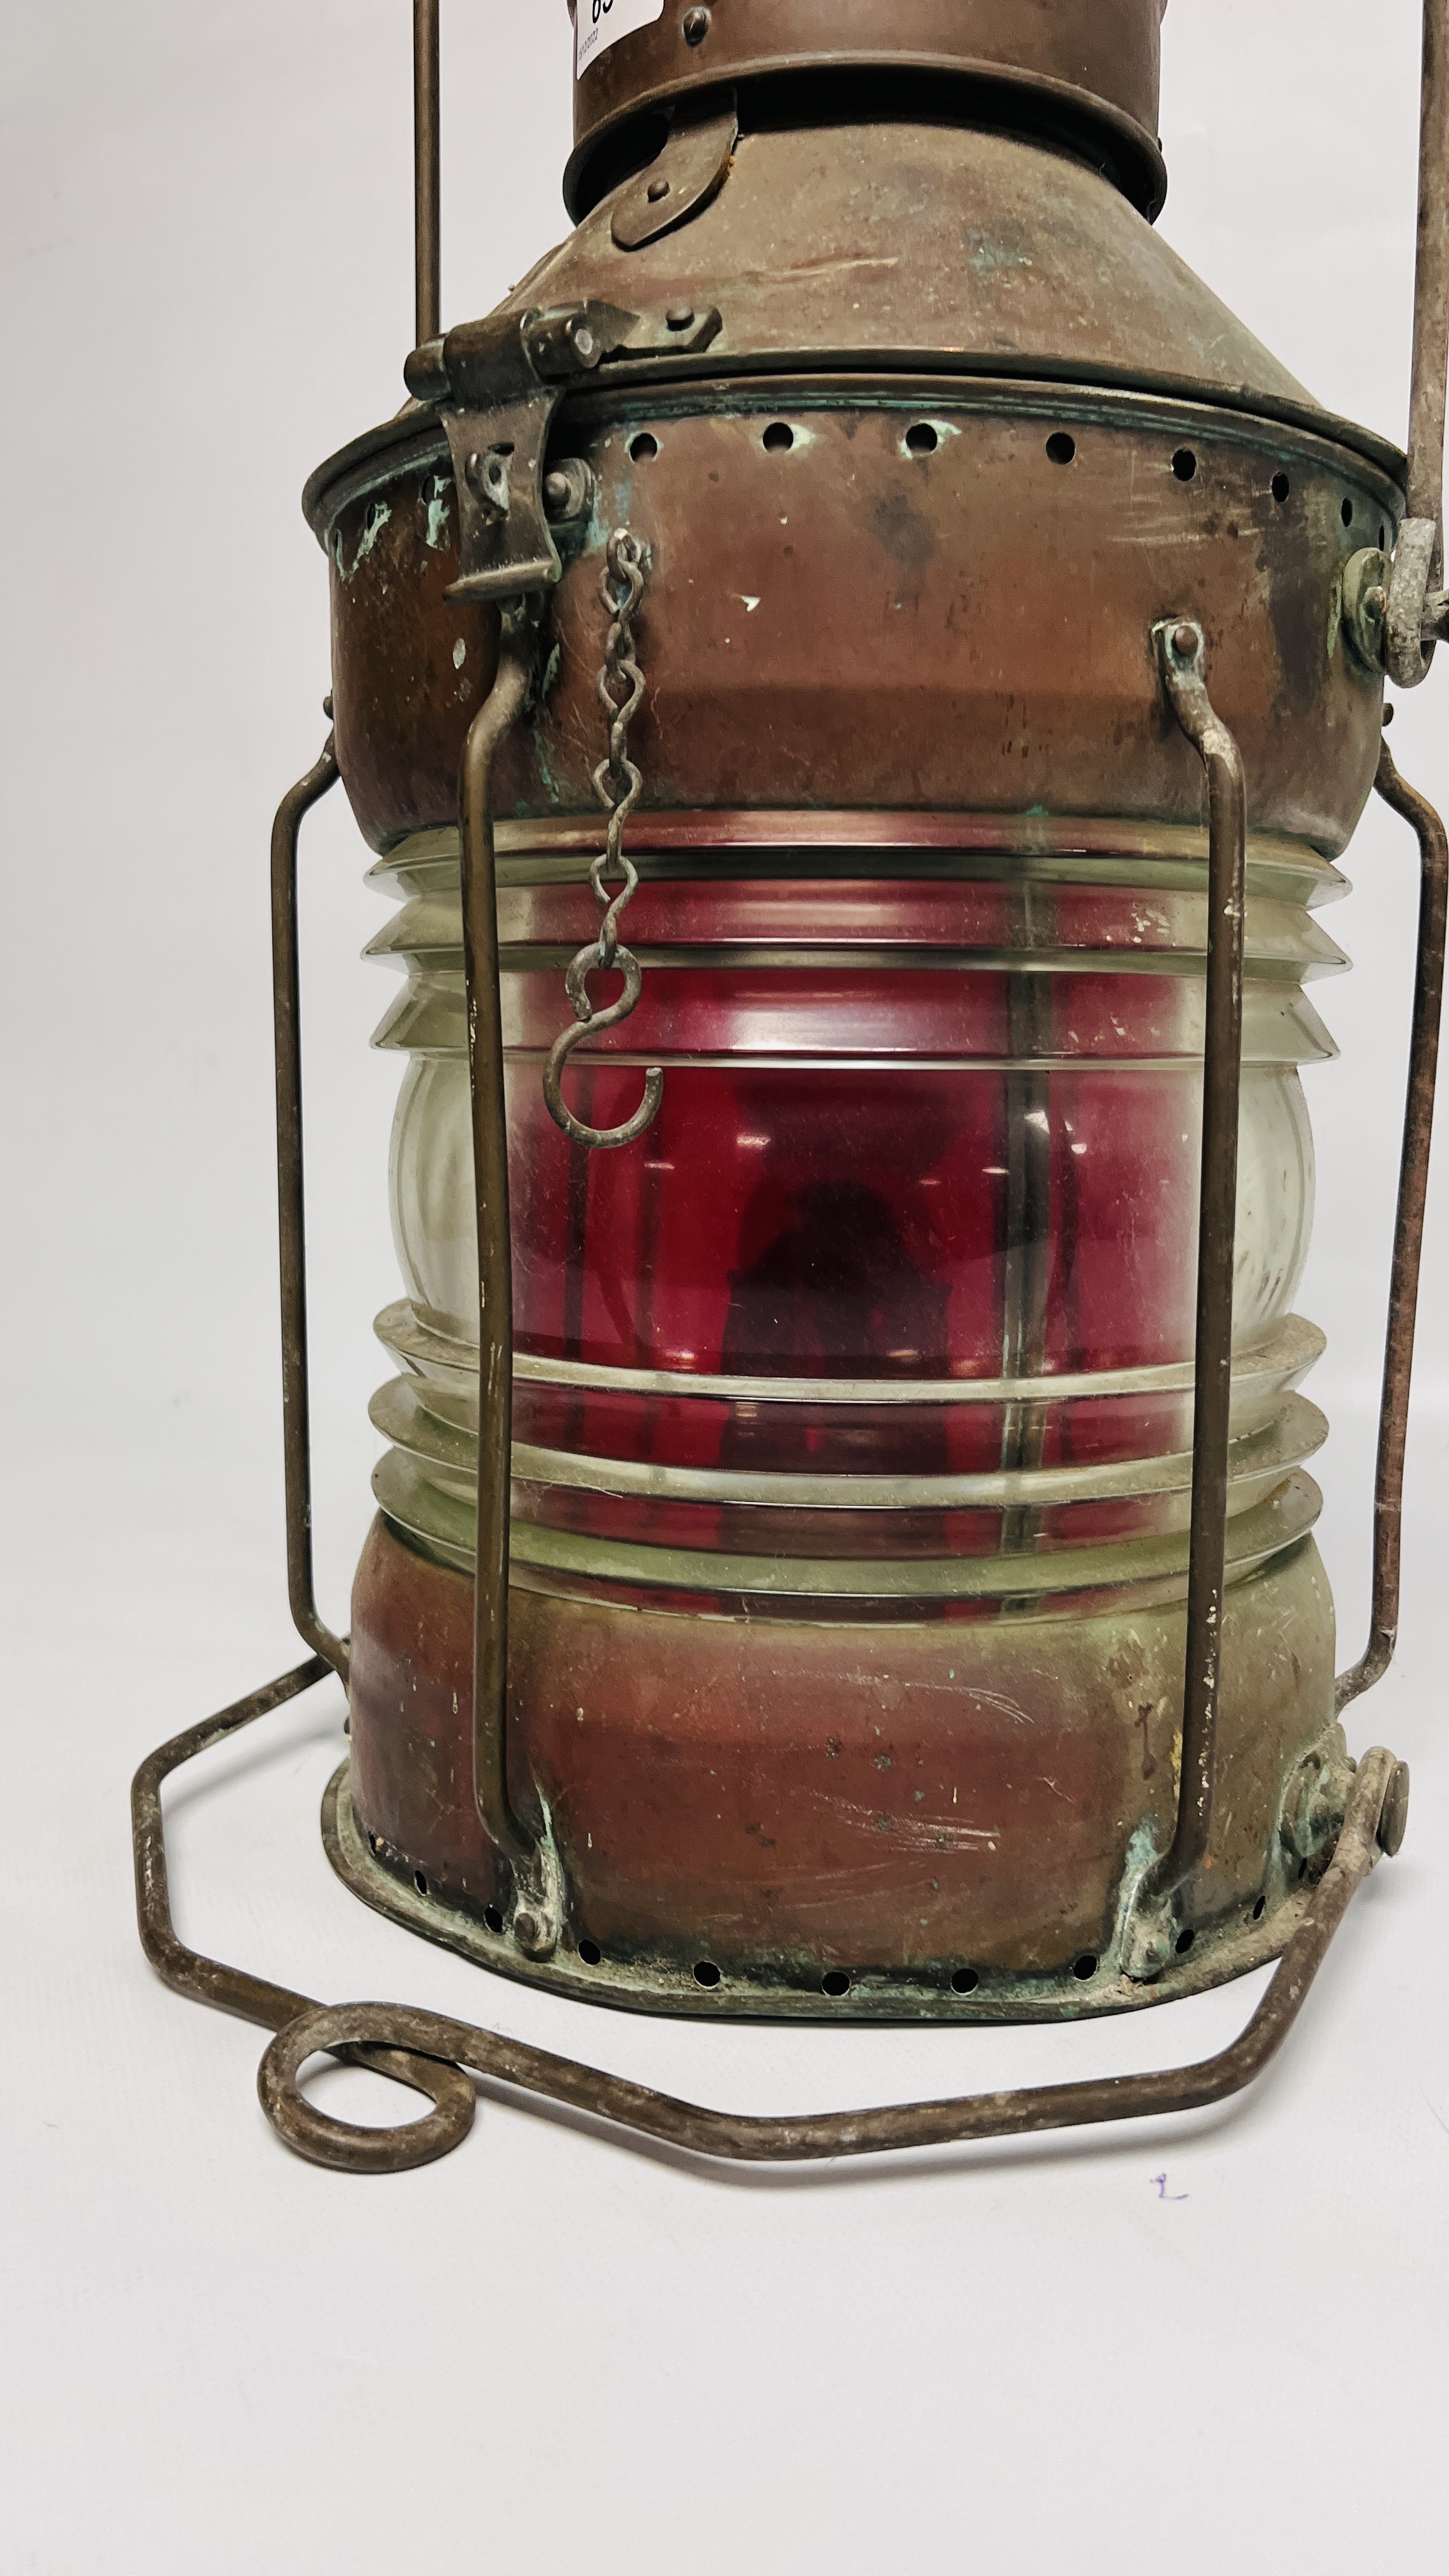 VINTAGE COPPER SHIPS LANTERN BEARING MAKERS NAME "SEAHORSE G & B" 48117 HEIGHT 48CM. - Image 5 of 8